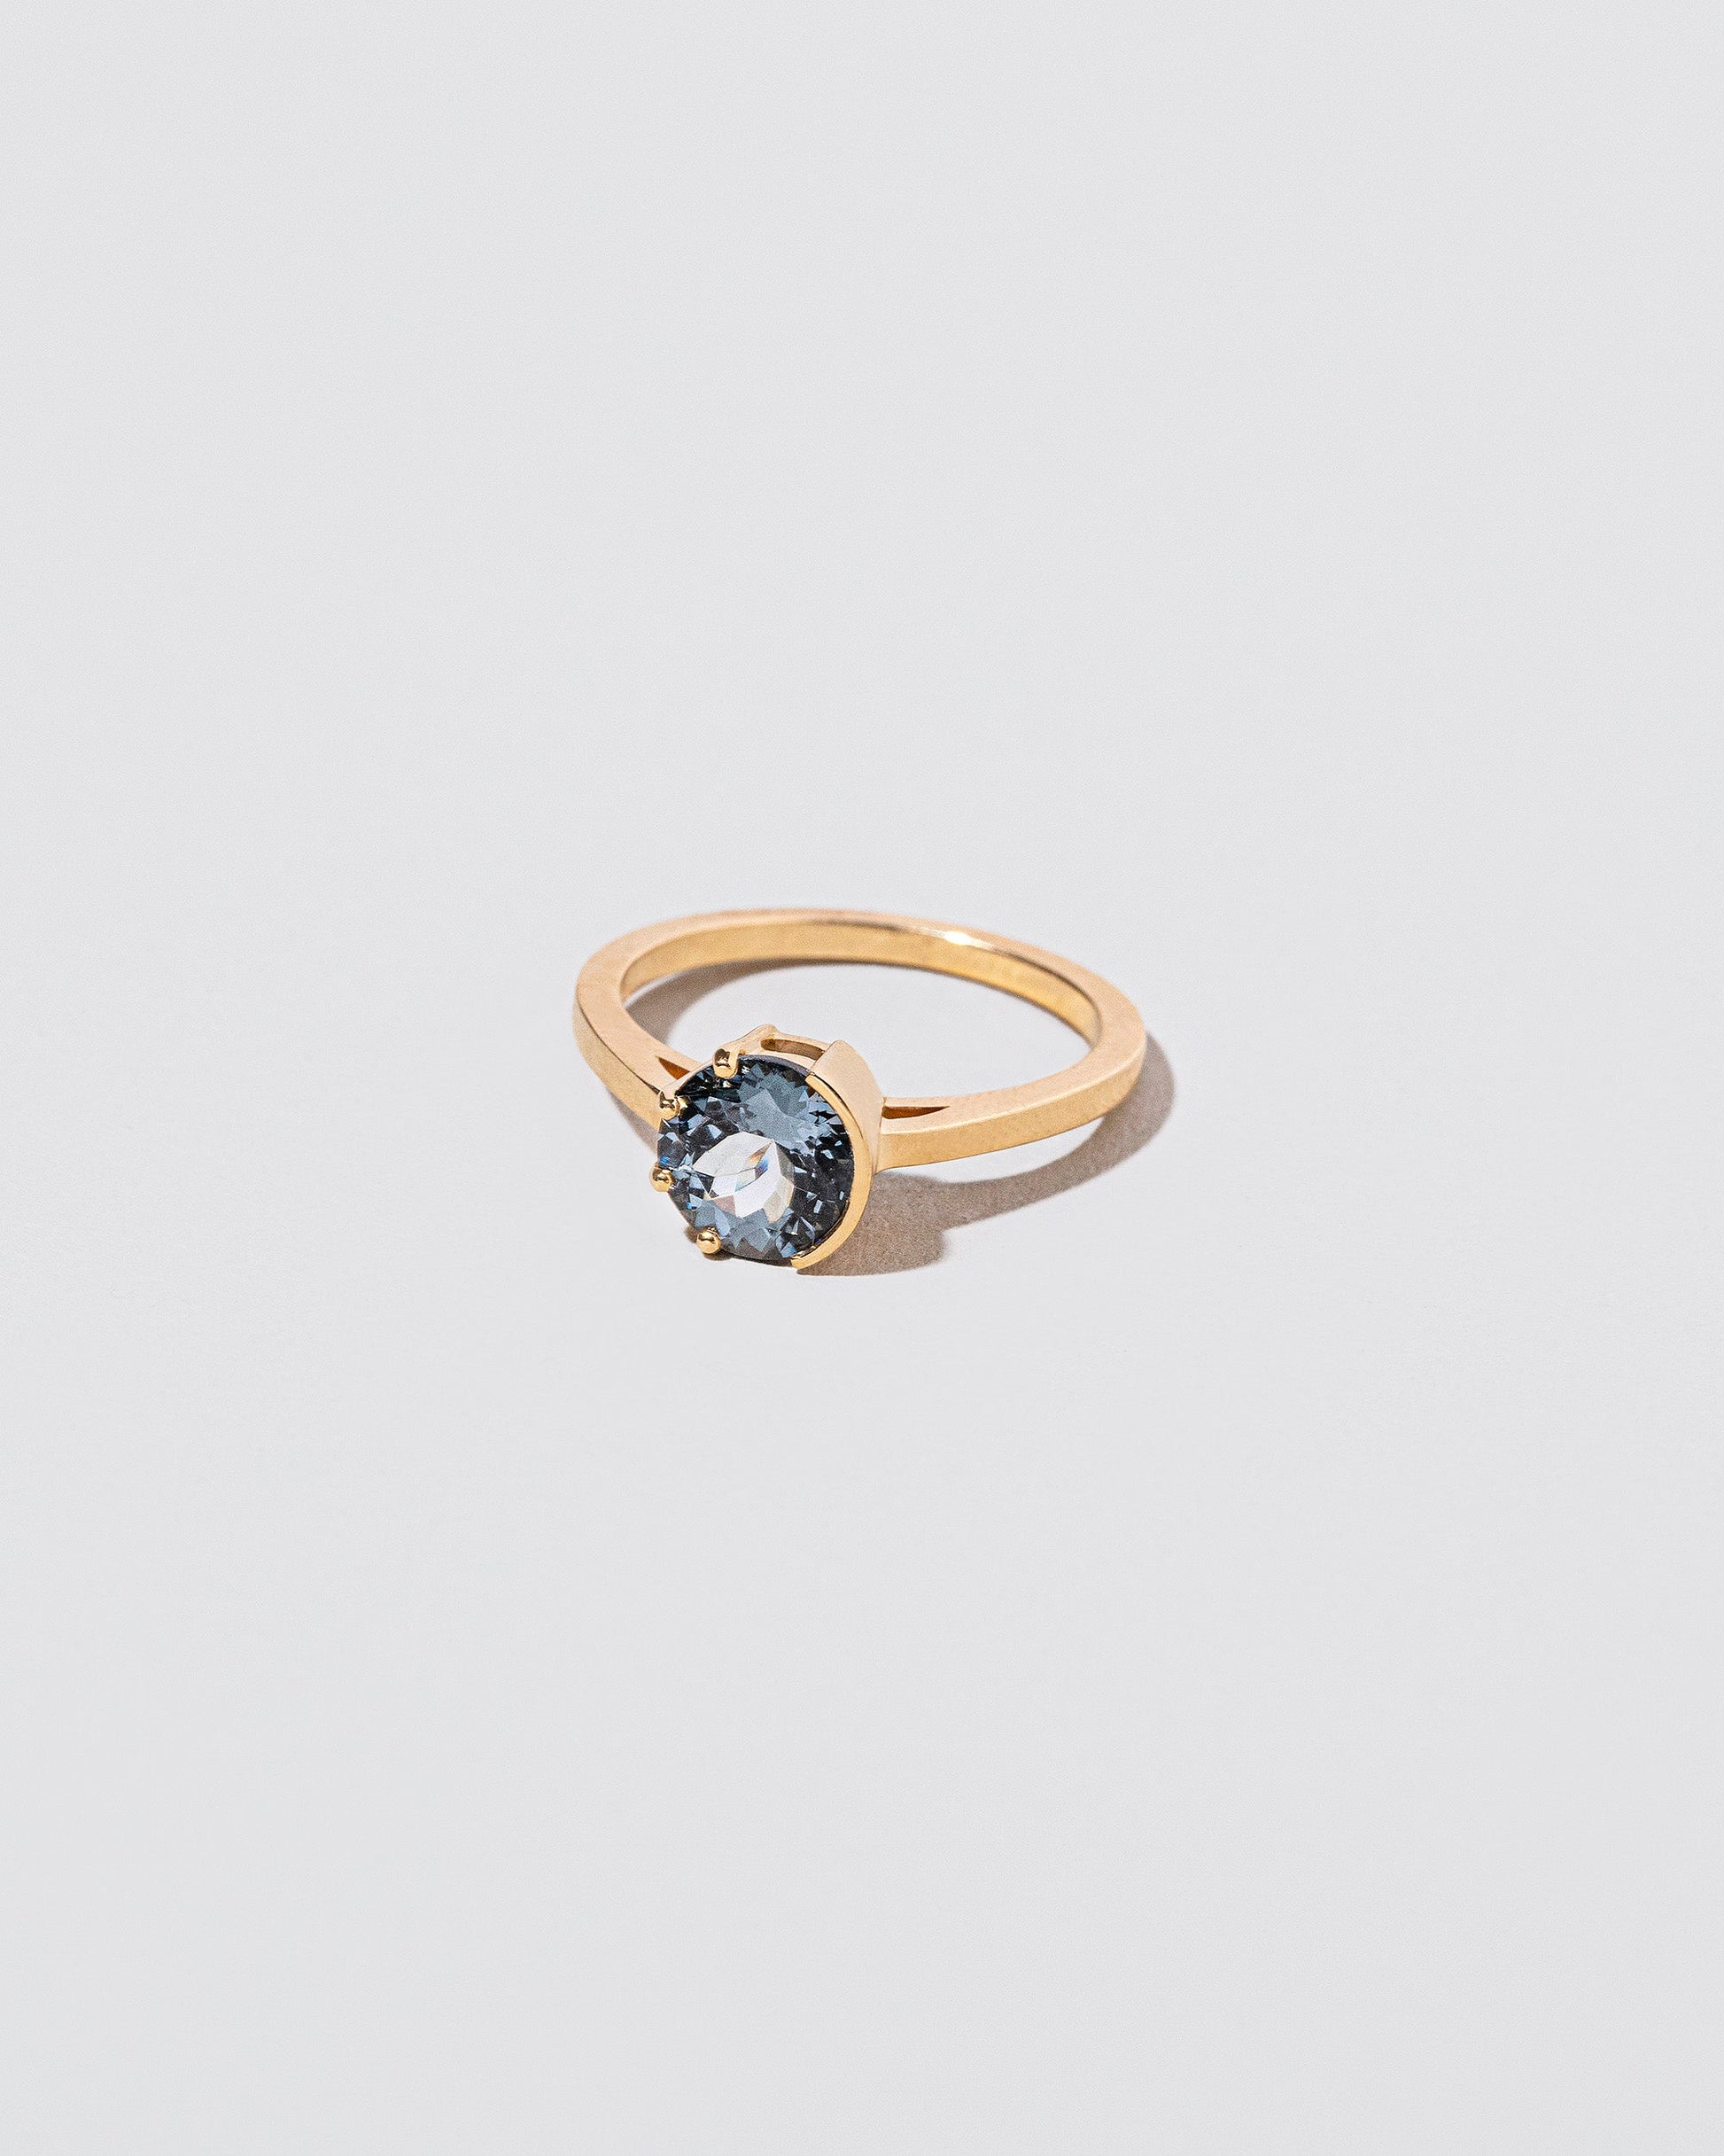  Sun & Moon Ring - Spinel on light color background.